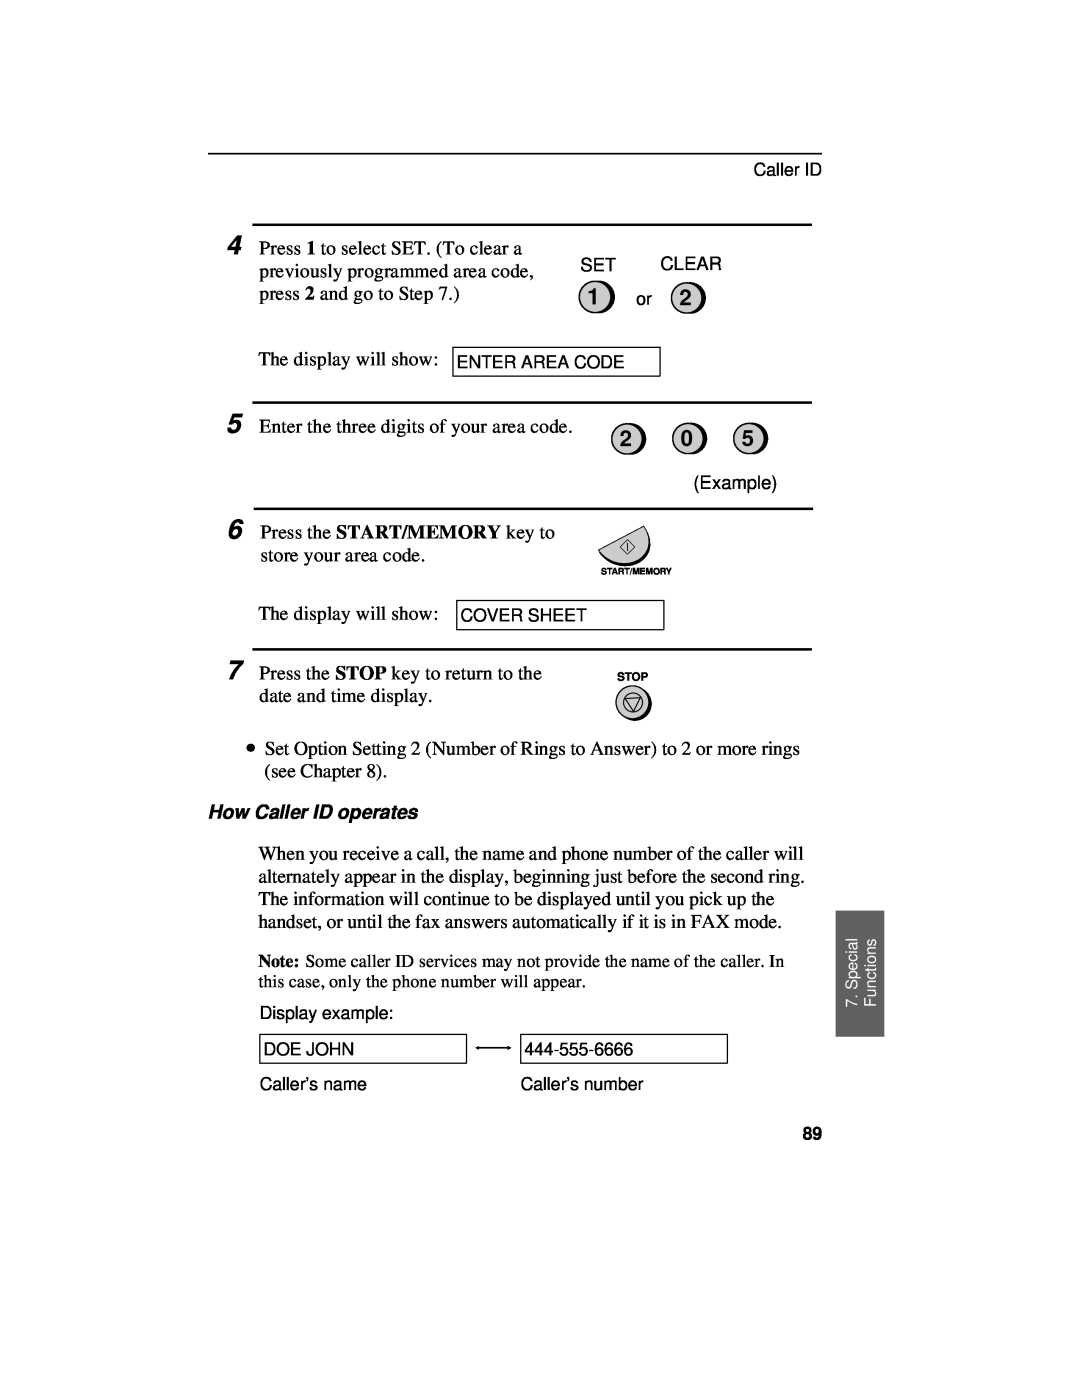 Sharp UX-460 operation manual How Caller ID operates, Clear, Example 